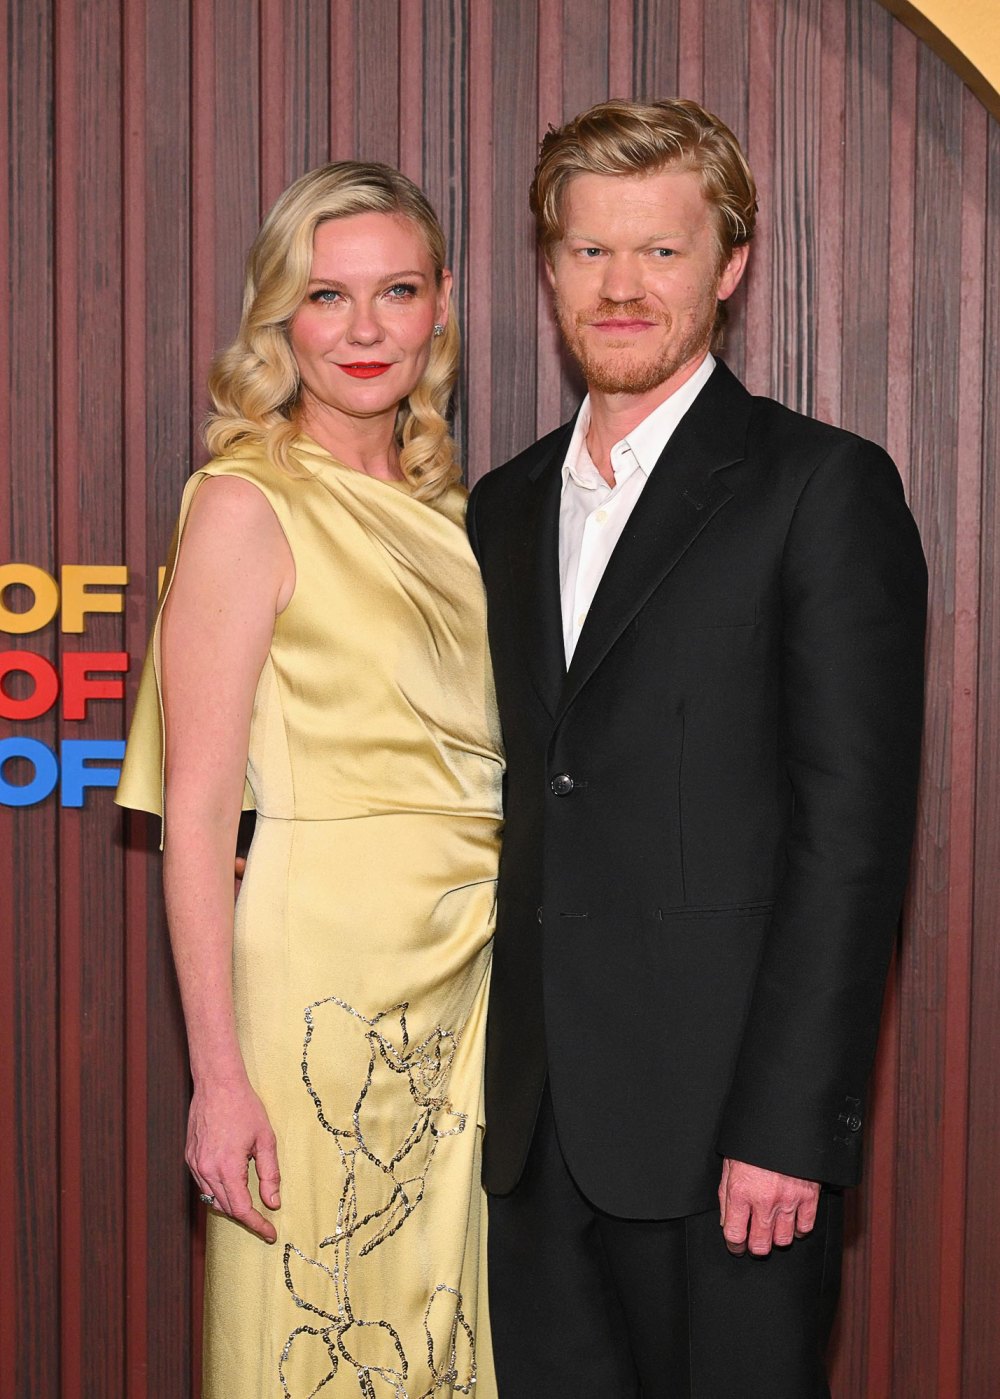 Jesse Plemons Has Much More Energy Since Losing 50 Lbs Shares Inspiration Behind Weight Loss 845